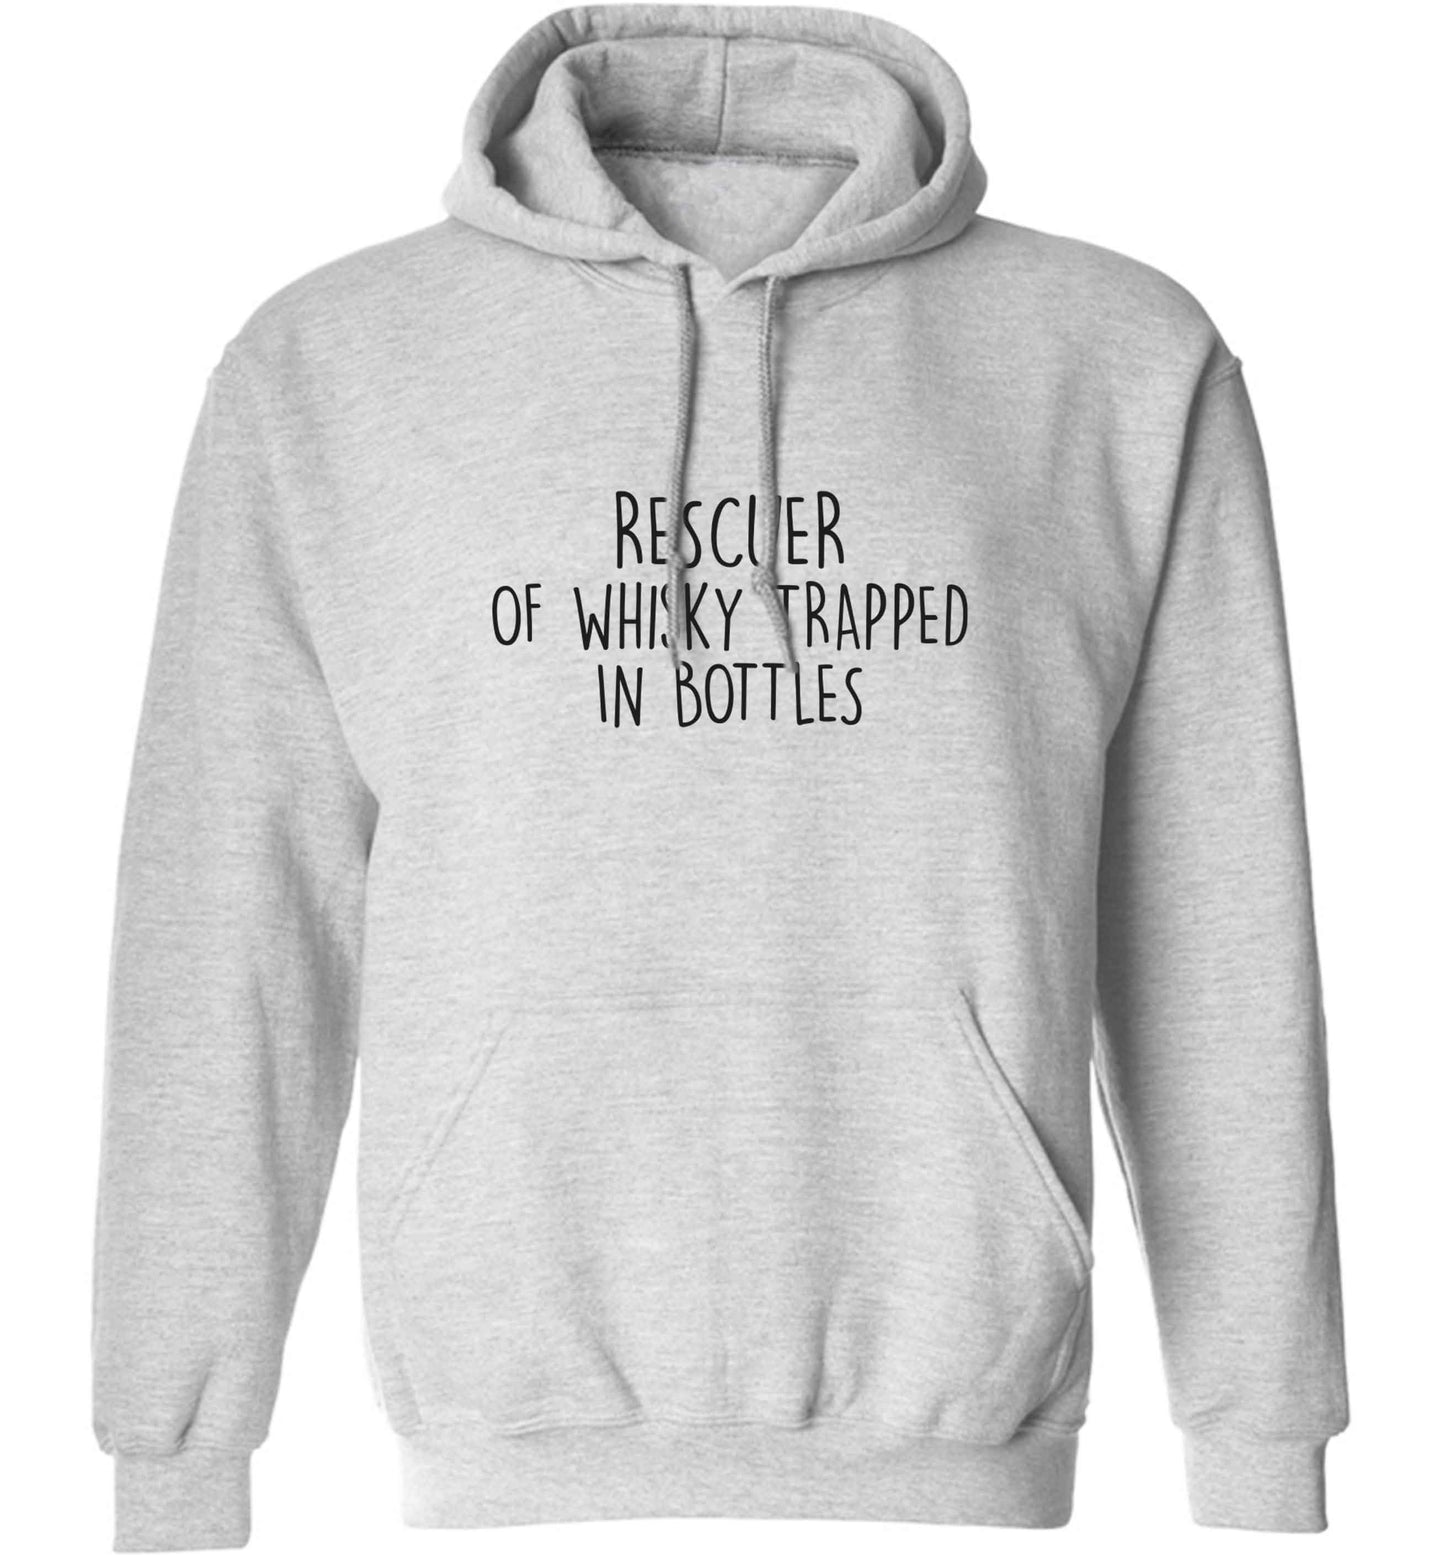 Rescuer of whisky trapped in bottles adults unisex grey hoodie 2XL